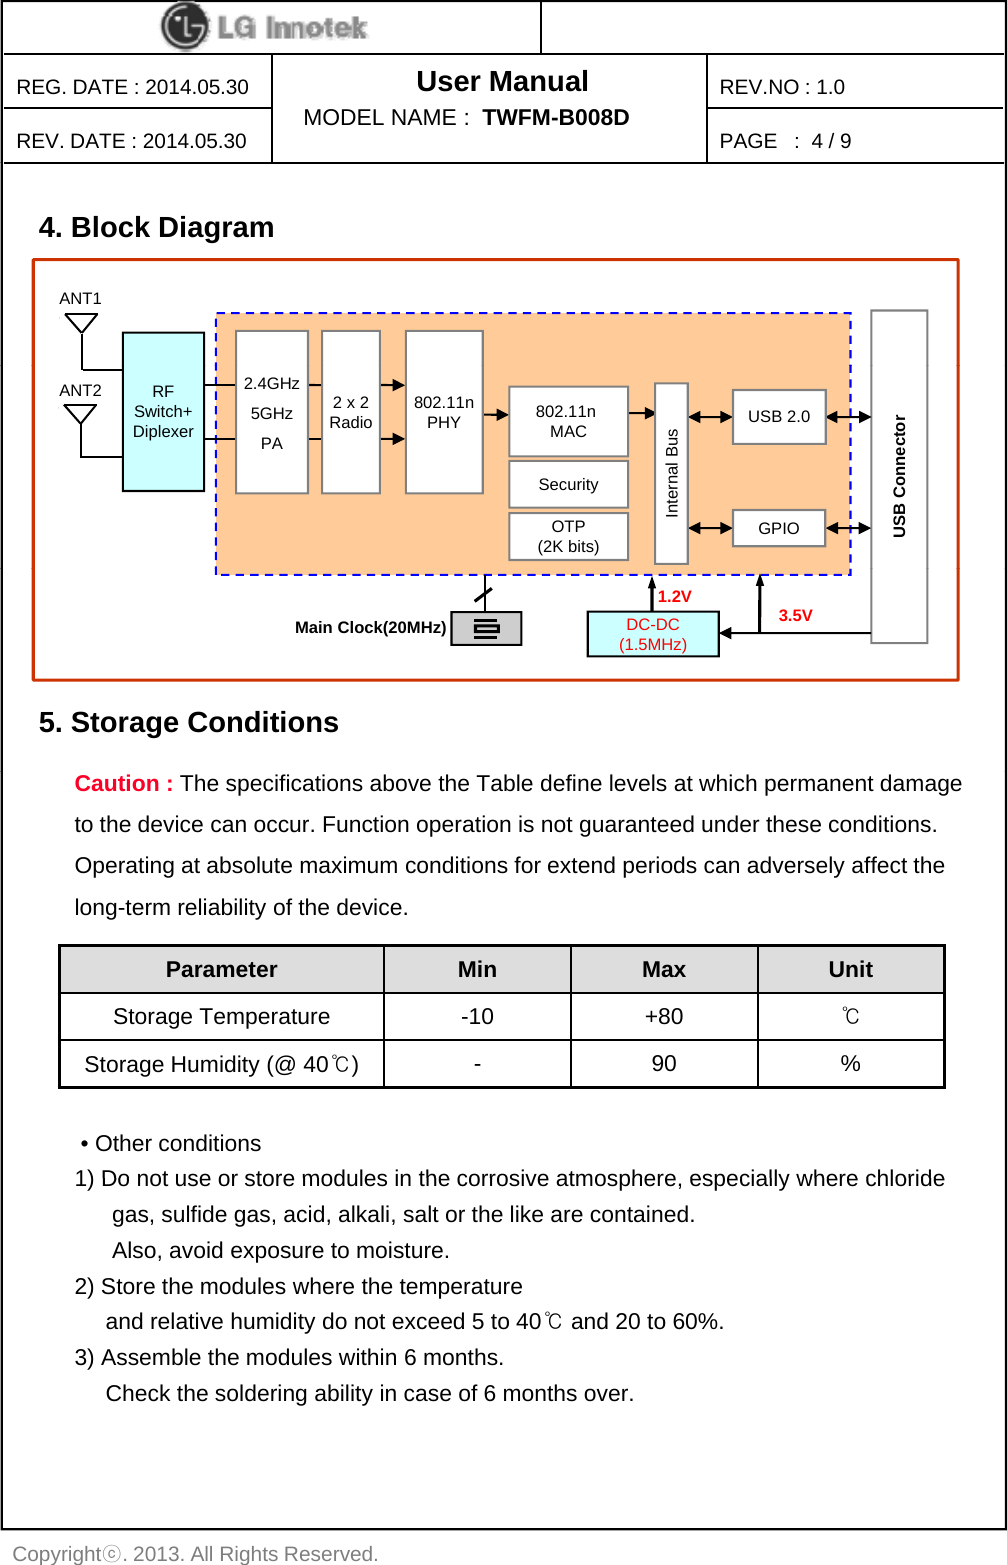 User ManualPAGE   :REG. DATE : 2014.05.30REV. DATE : 2014.05.30REV.NO : 1.0MODEL NAME :  TWFM-B008D 4 / 94. Block DiagramBCM43236BANT1USB ConnectorRFSwitch+DiplexerANT2802.11n MAC2.4GHz5GHzPA2 x 2Radio 802.11nPHYSecurityOTP(2K bits)Internal BusGPIOUSB 2.05. Storage ConditionsMain Clock(20MHz)1.2VDC-DC(1.5MHz)3.5VParameterMinMaxUnitCaution : The specifications above the Table define levels at which permanent damageto the device can occur. Function operation is not guaranteed under these conditions.Operating at absolute maximum conditions for extend periods can adversely affect thelong-term reliability of the device.ParameterMinMaxUnitStorage Temperature -10 +80 ℃Storage Humidity (@ 40℃)-90%• Other conditions1) Do not use or store modules in the corrosive atmosphere especially where chloride1) Do not use or store modules in the corrosive atmosphere, especially where chloridegas, sulfide gas, acid, alkali, salt or the like are contained.Also, avoid exposure to moisture.2) Store the modules where the temperatureand relative humidity do not exceed 5 to 40℃and 20 to 60%.3) Assemble the modules within 6 months.Copyrightⓒ. 2013. All Rights Reserved.Check the soldering ability in case of 6 months over.